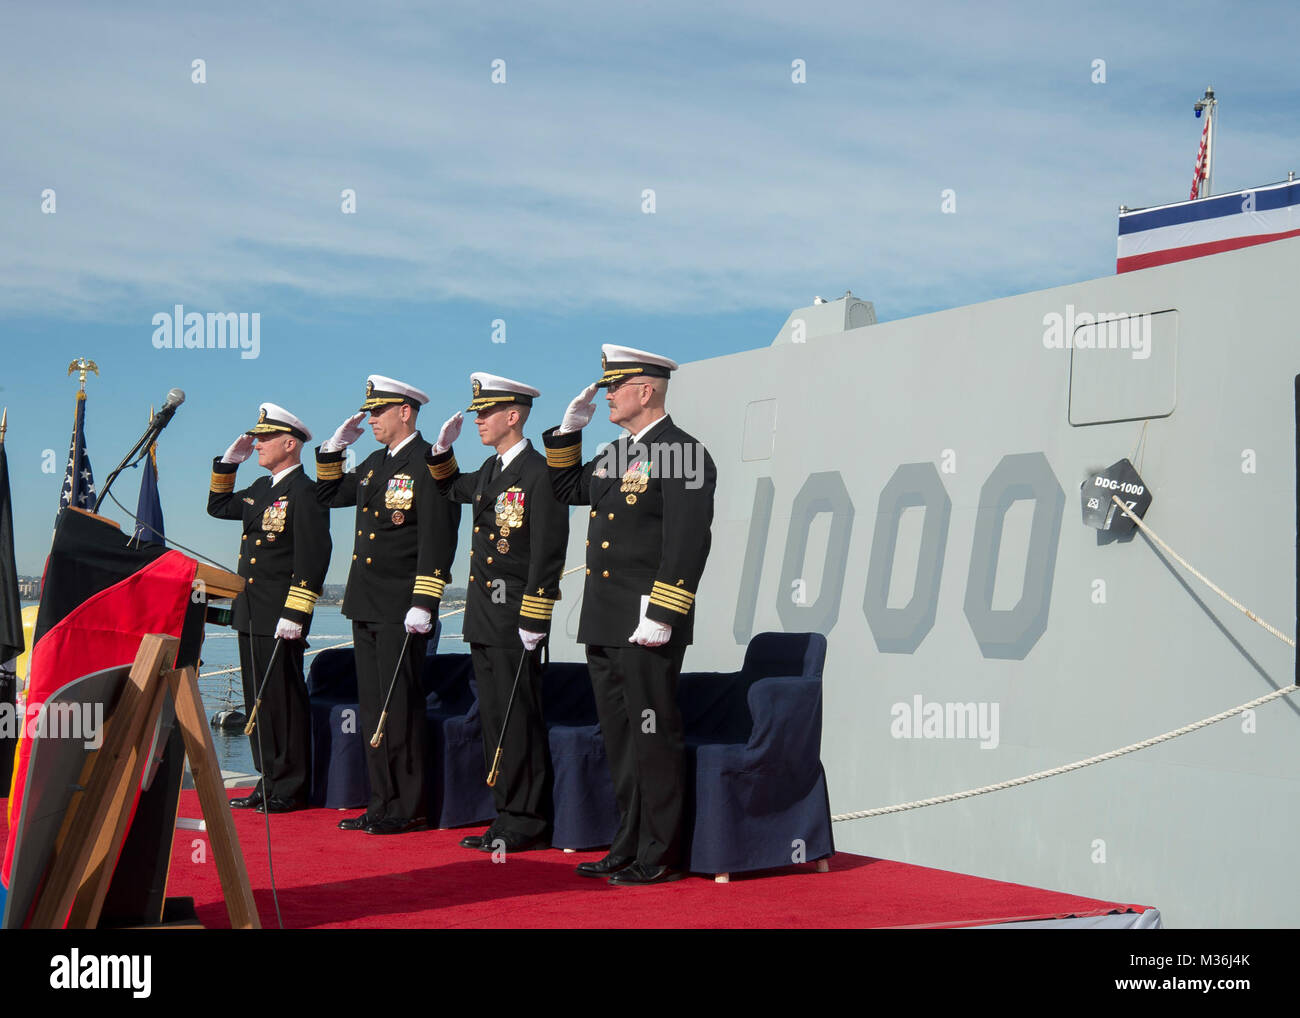 SAN DIEGO (Dec. 20, 2016) Left to right, Vice Adm. Thomas Rowden, commander, Naval Surface Forces, Capt. James A. Kirk, outgoing commanding officer (CO) of  guided-missile destroyer USS Zumwalt (DDG 1000), Capt. Scott A. Tait, in-coming CO of Zumwalt, and Capt. W. Kyle Fauntleroy, Force Chaplain, Surface Force, U.S. Pacific Fleet, salute the ensign during a change of command ceremony at Naval Base San Diego. (U.S. Navy photo by Petty Officer 2nd Class Zachary Bell/Released) USS Zumwalt Holds Change of Command Ceremony by #PACOM Stock Photo